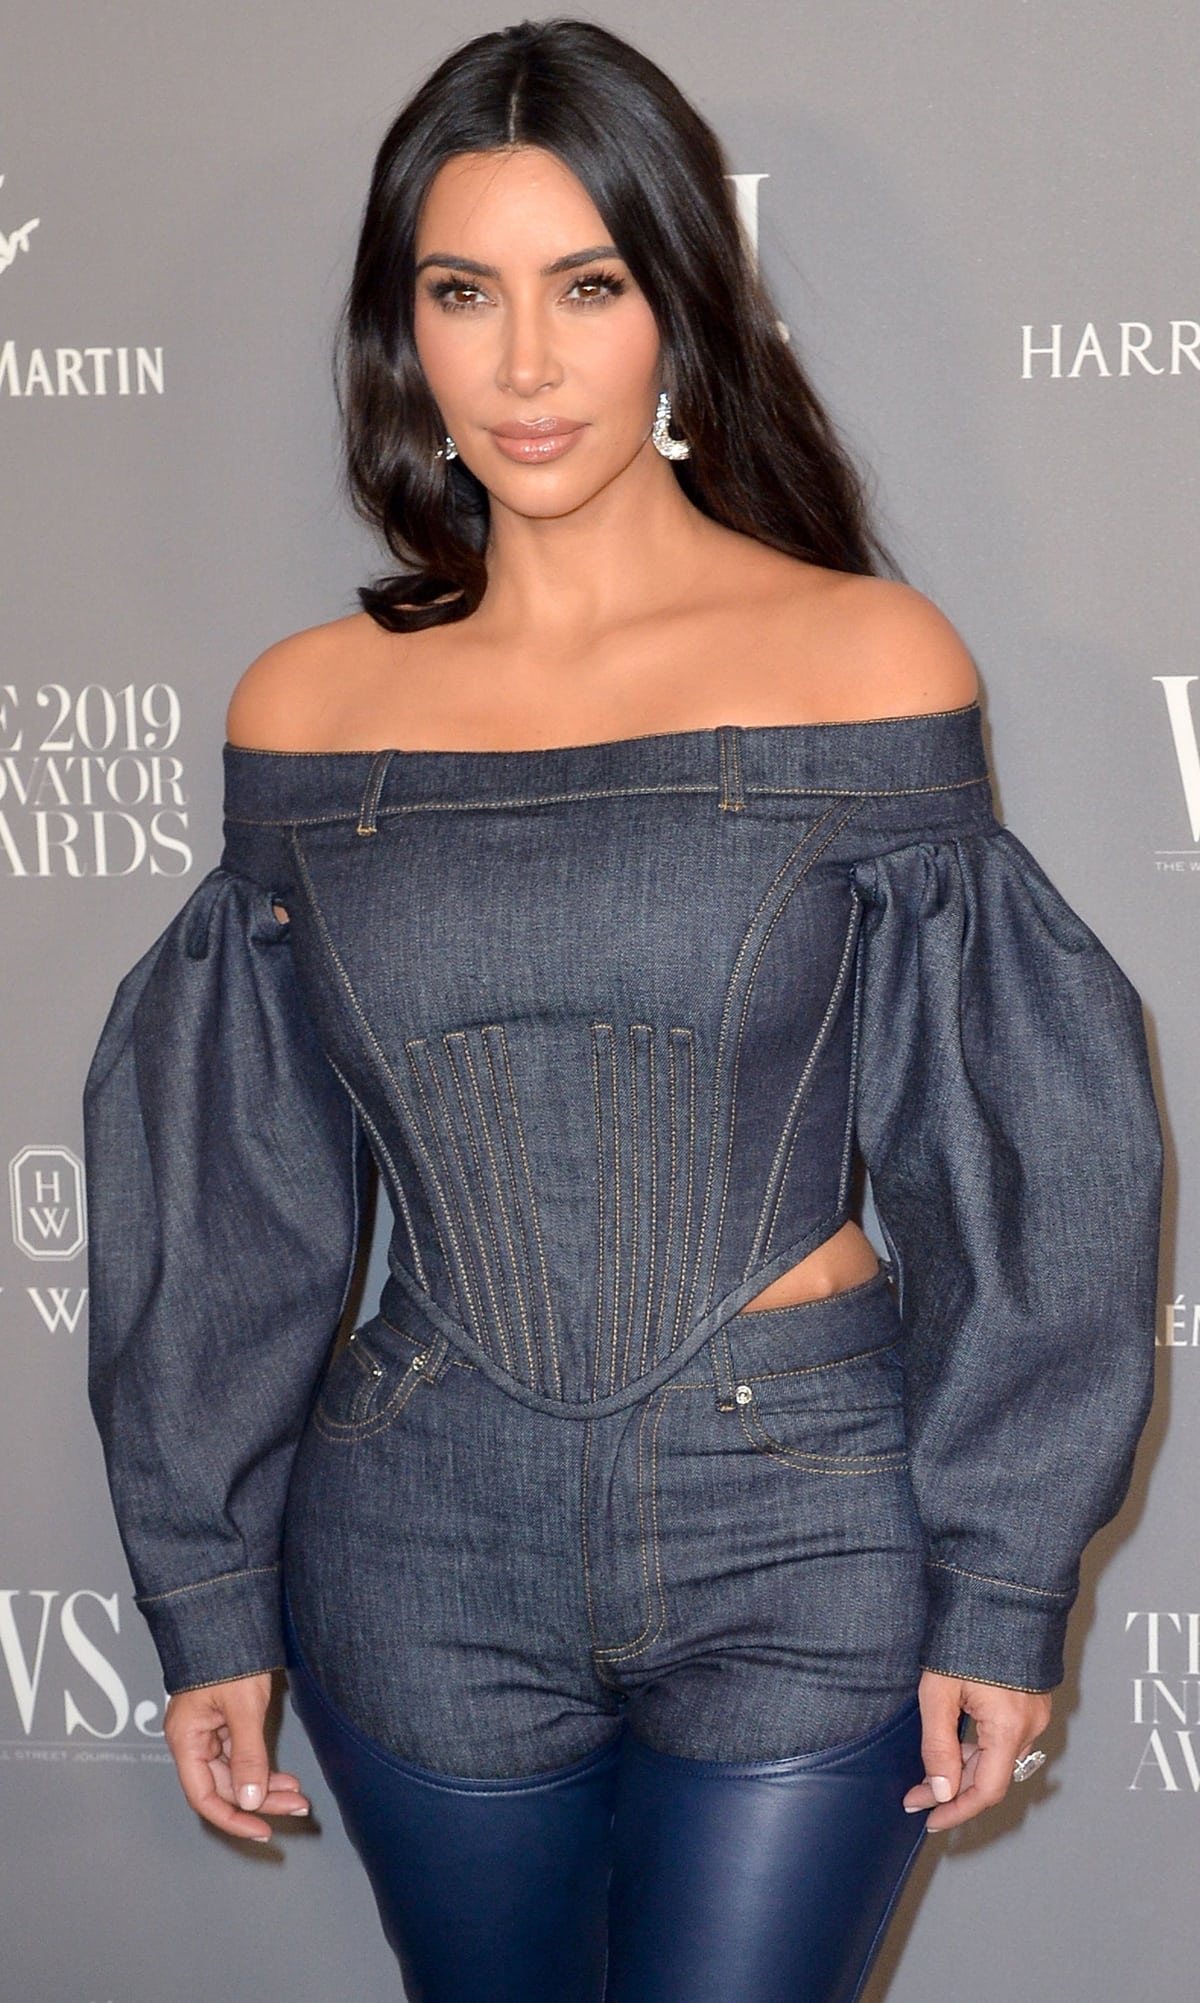 Kim Kardashian is trying to become a lawyer without going to law school